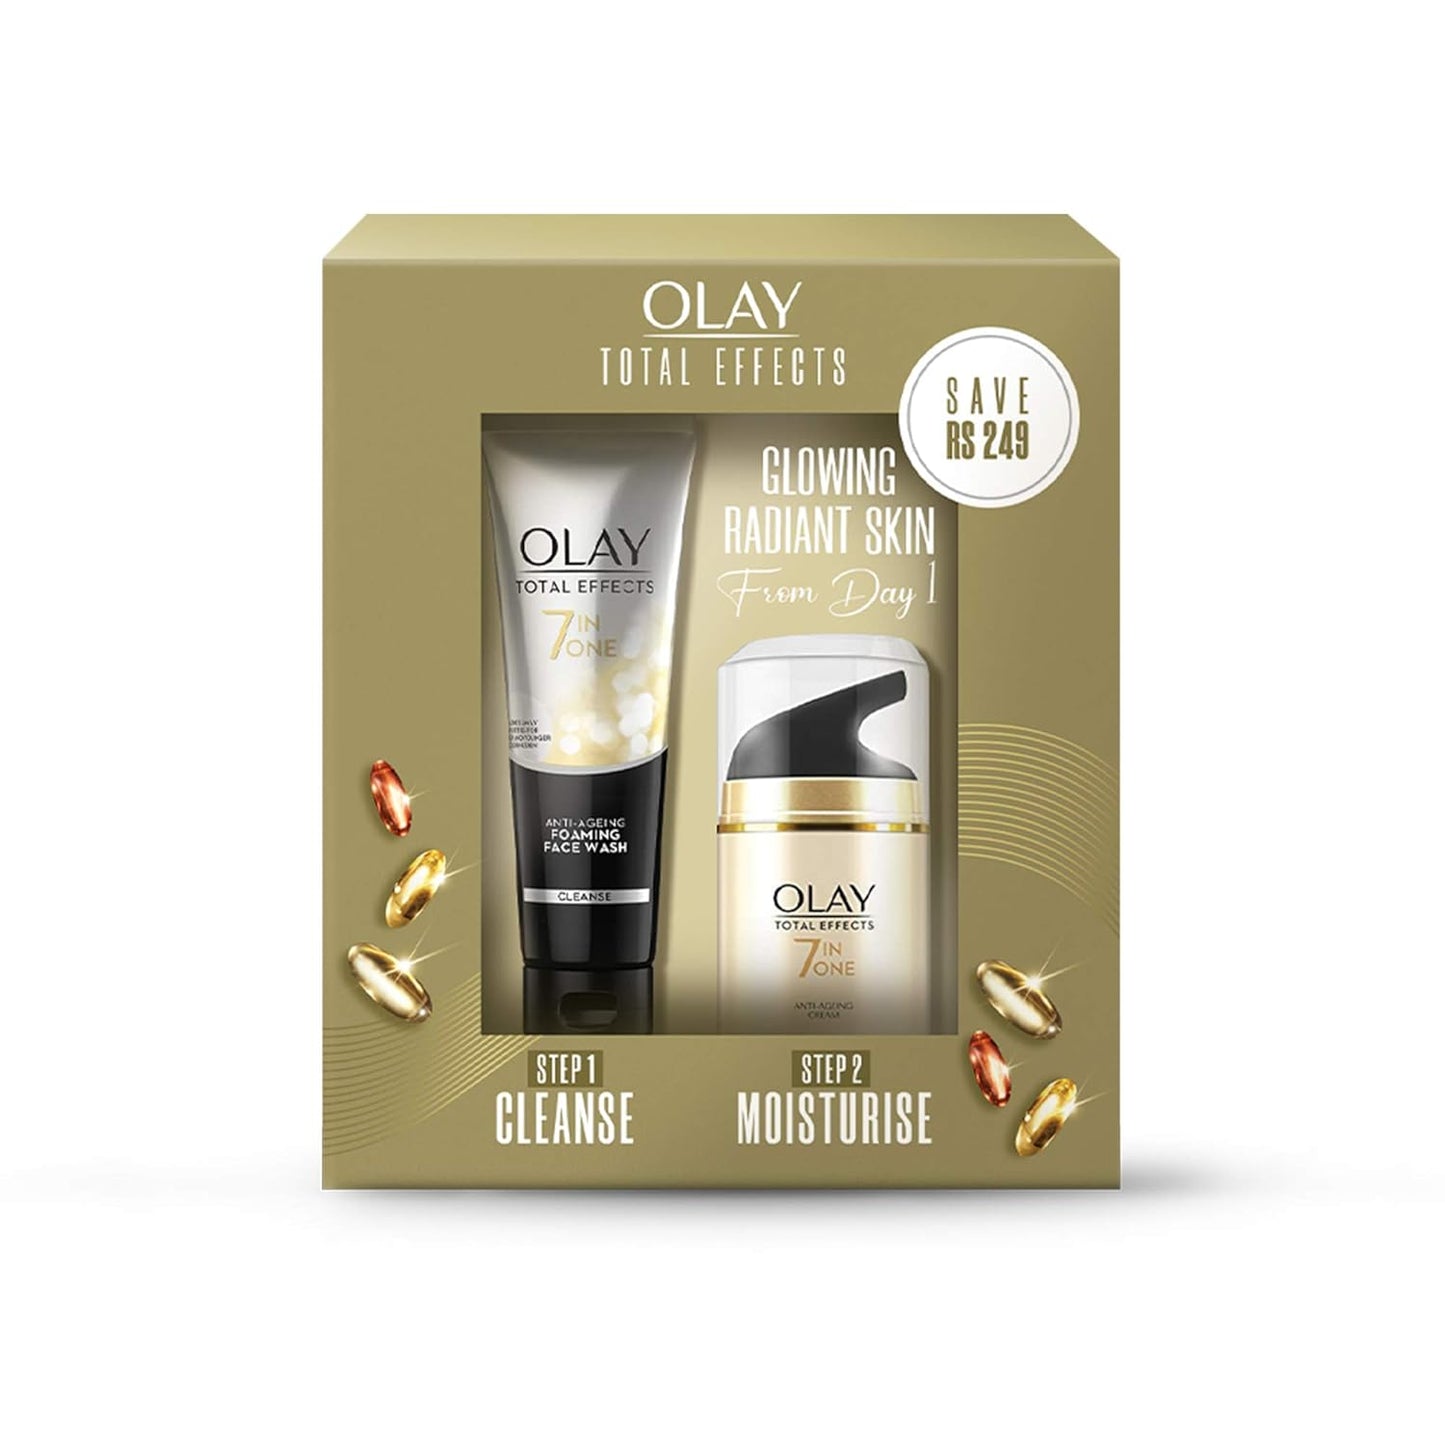 Olay Total Effects 7 in One Day cream (SPF 15) 50 g Total Effects Foaming Cleanser 100g